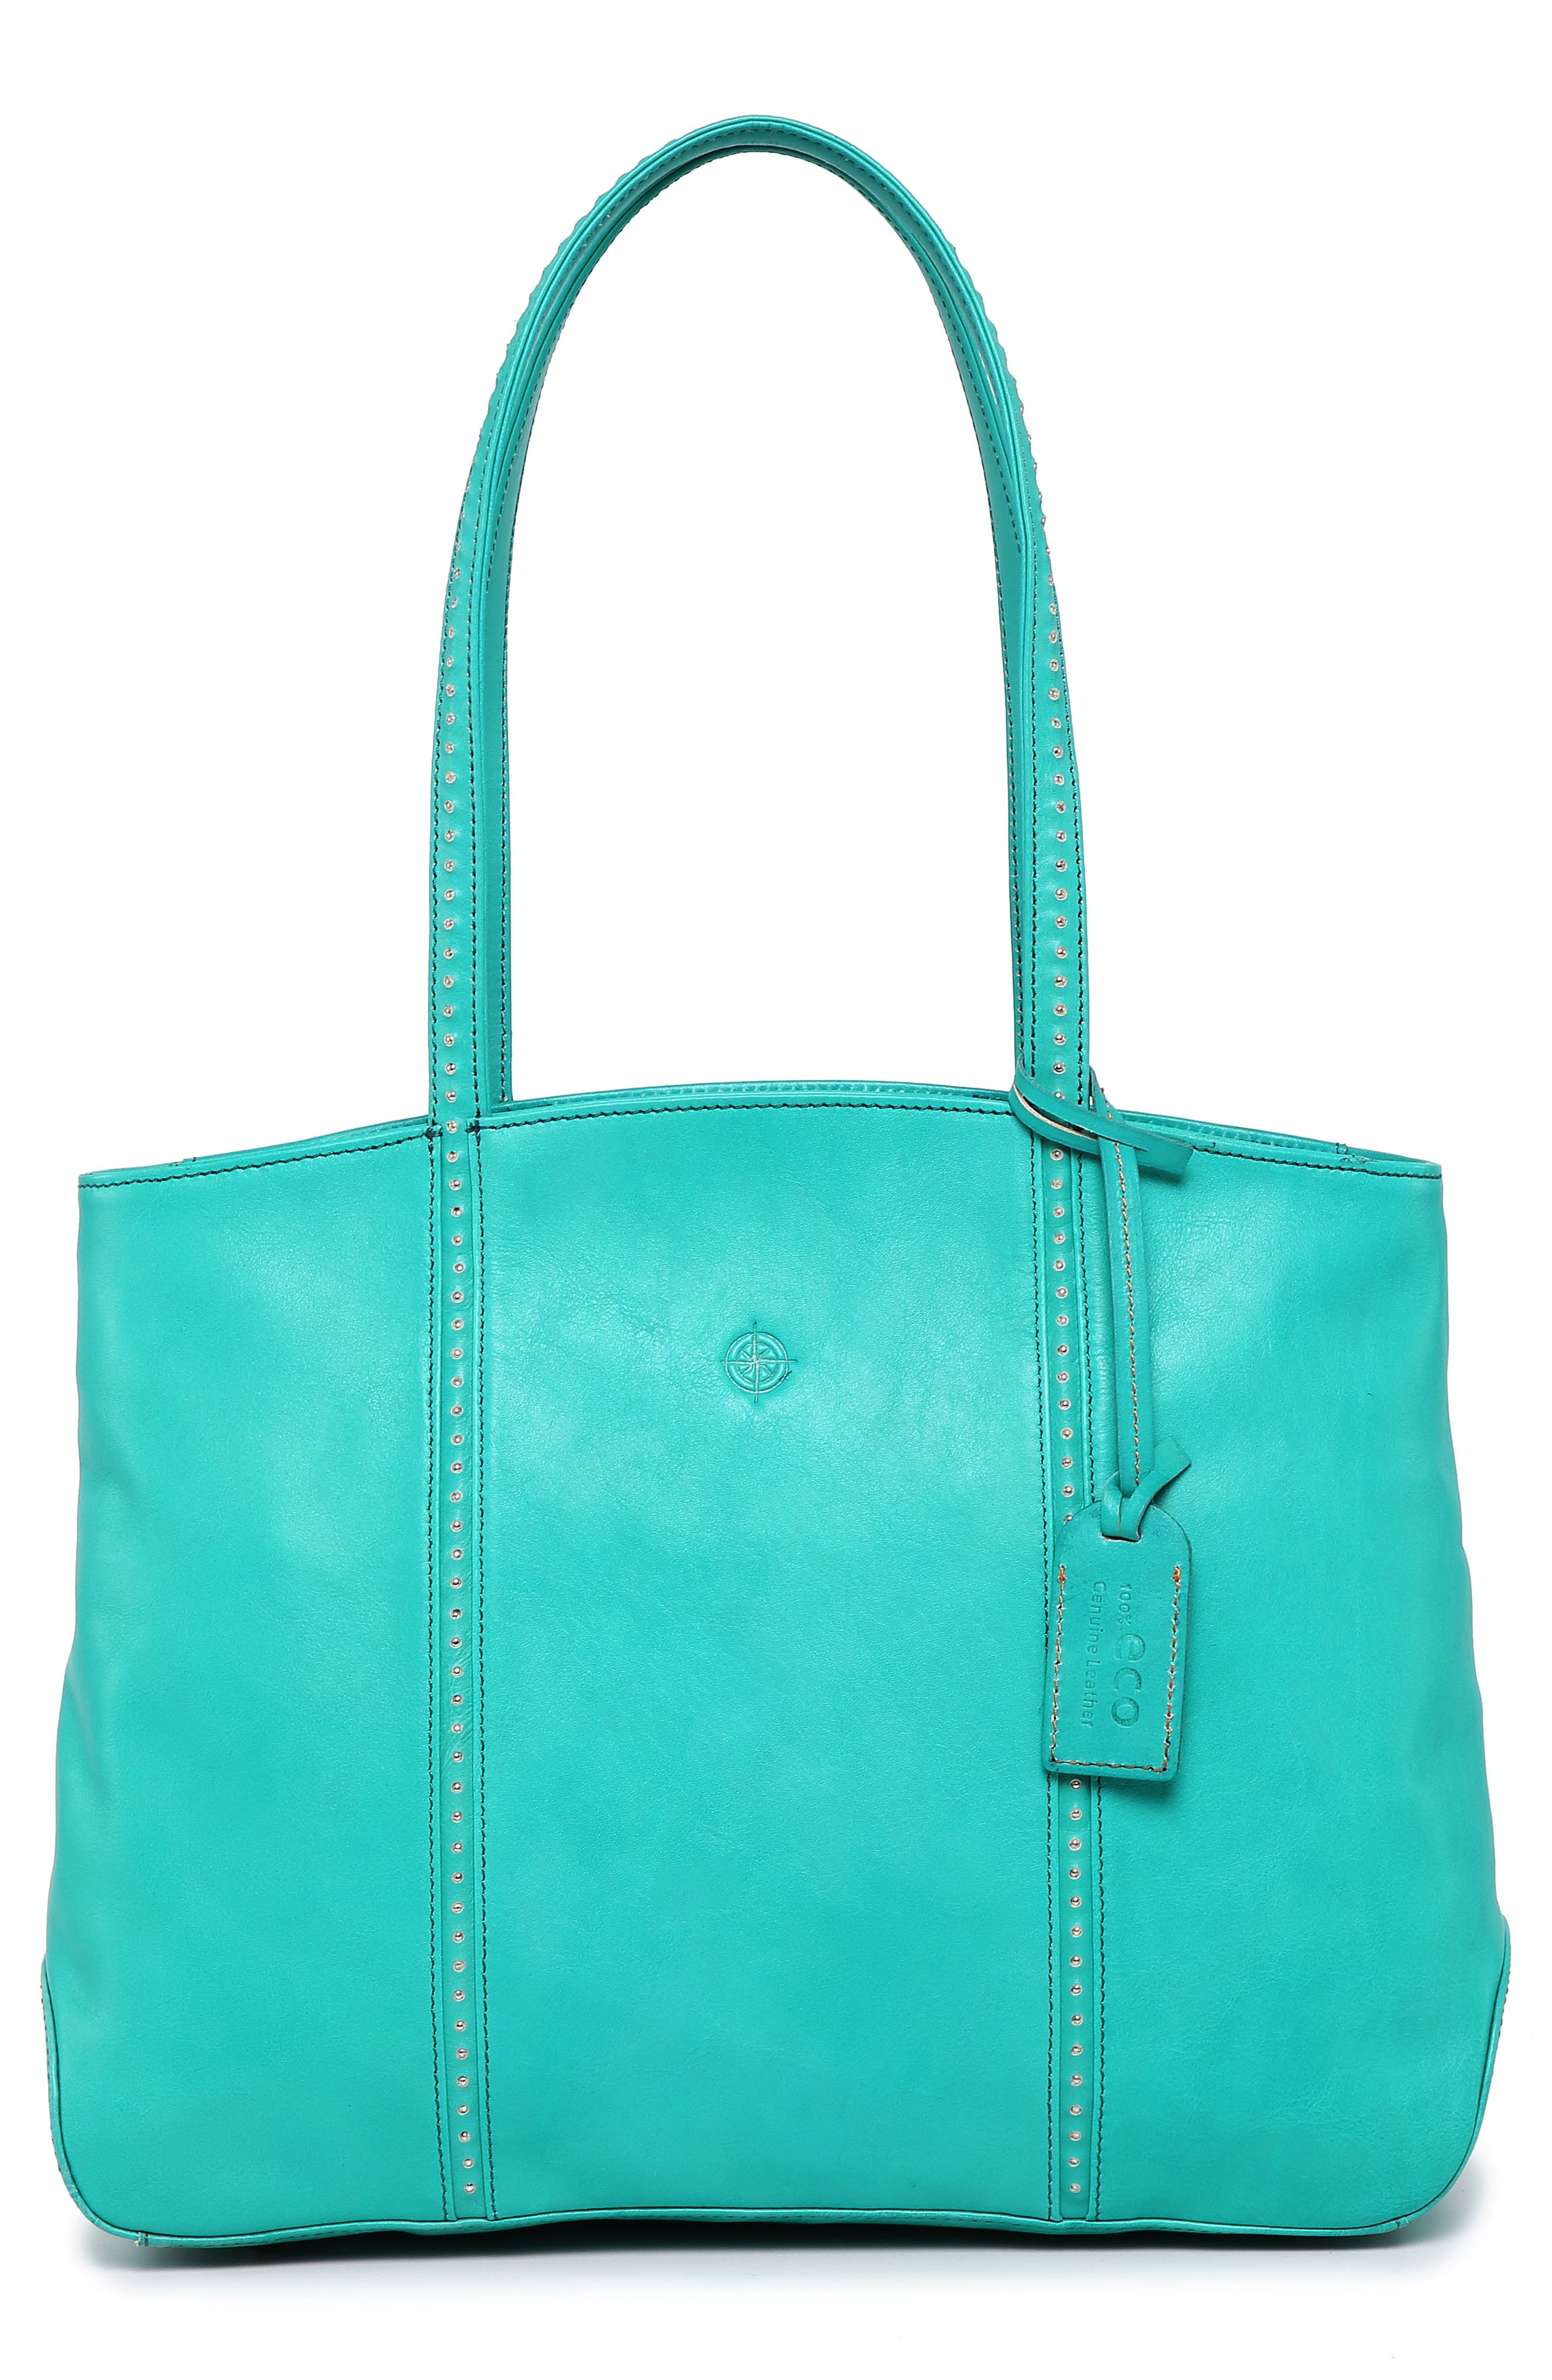 OLD TREND Dancing Bamboo Leather Tote   Nordstromrack